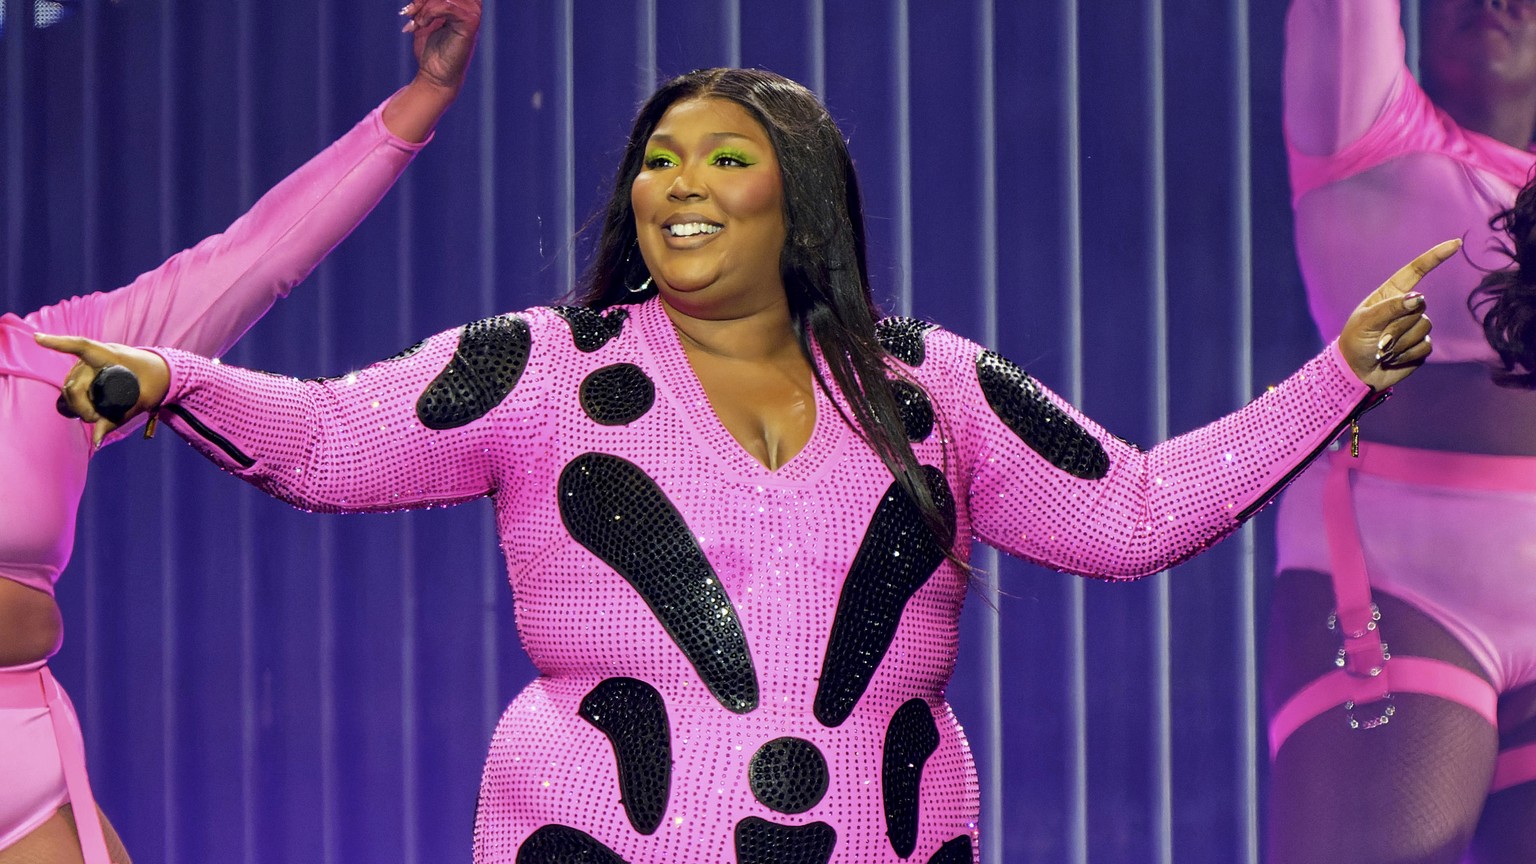 Lizzo performs at the United Center on Wednesday, May 17, 2023, in Chicago. (Photo by Rob Grabowski/Invision/AP)
Lizzo